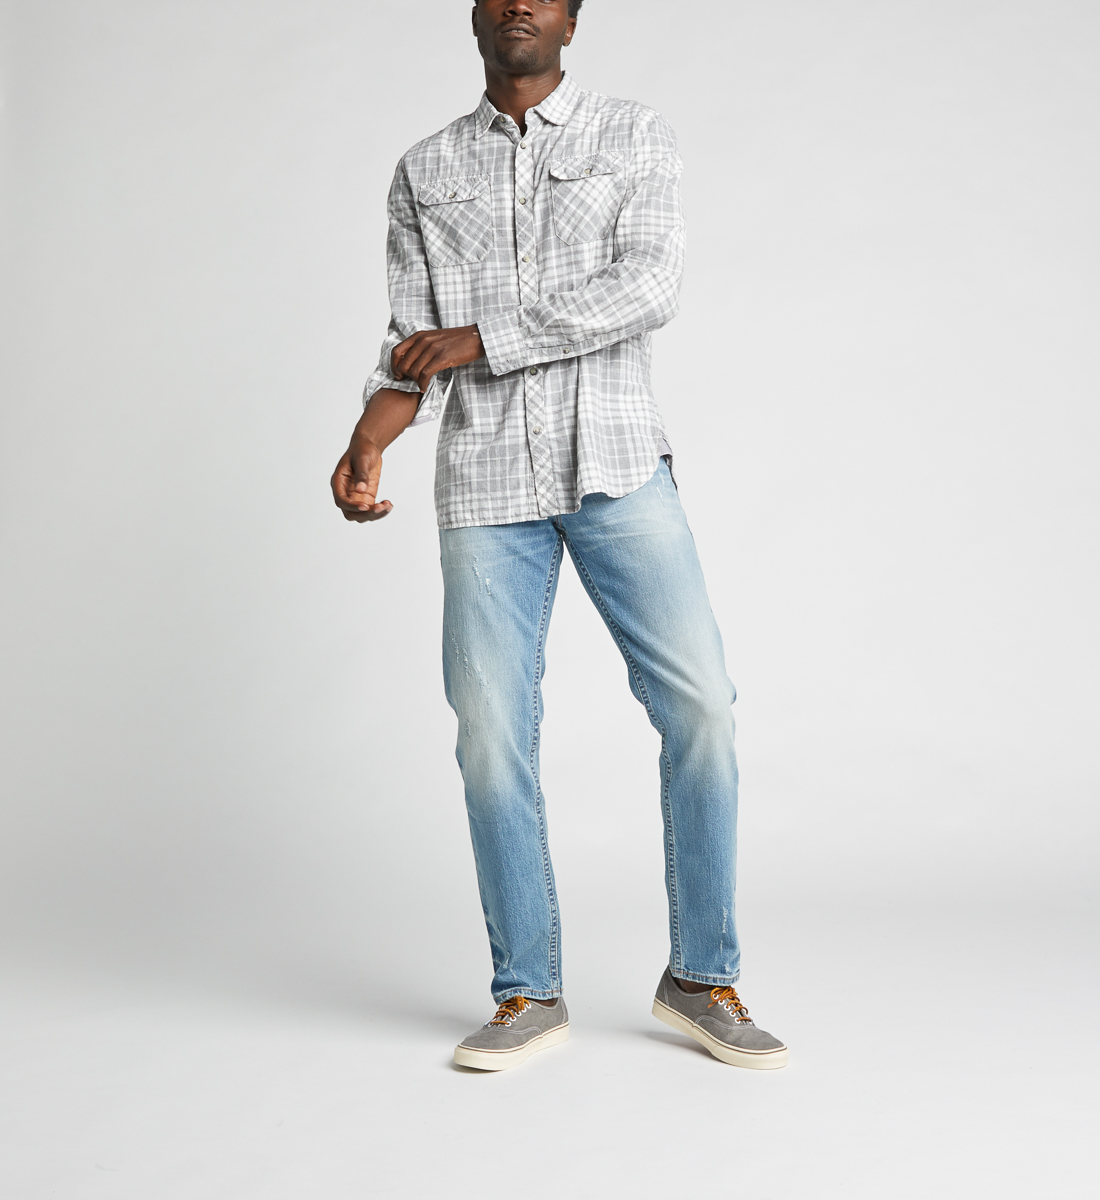 relaxed fit tapered leg jeans